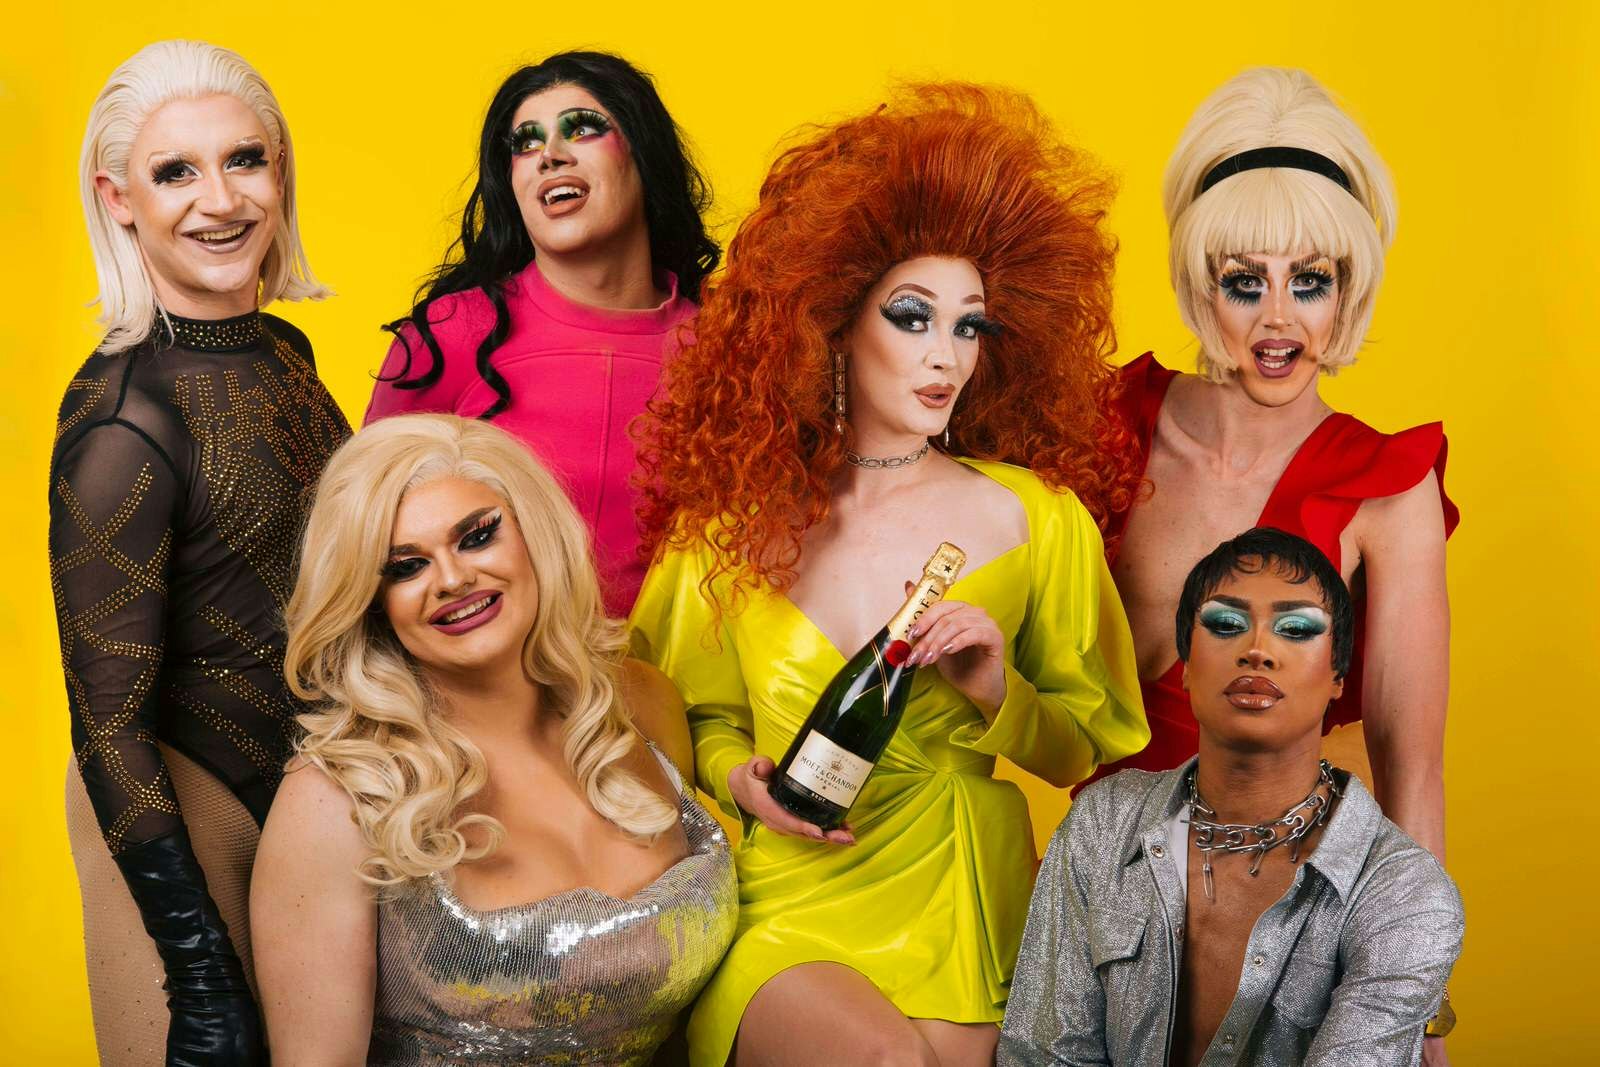 A group of drag queens pose in front of a solid yellow background. The queen in the centre wears a yellow dress and huge red-haired wig, holding a bottle of prosecco. London drag brunches